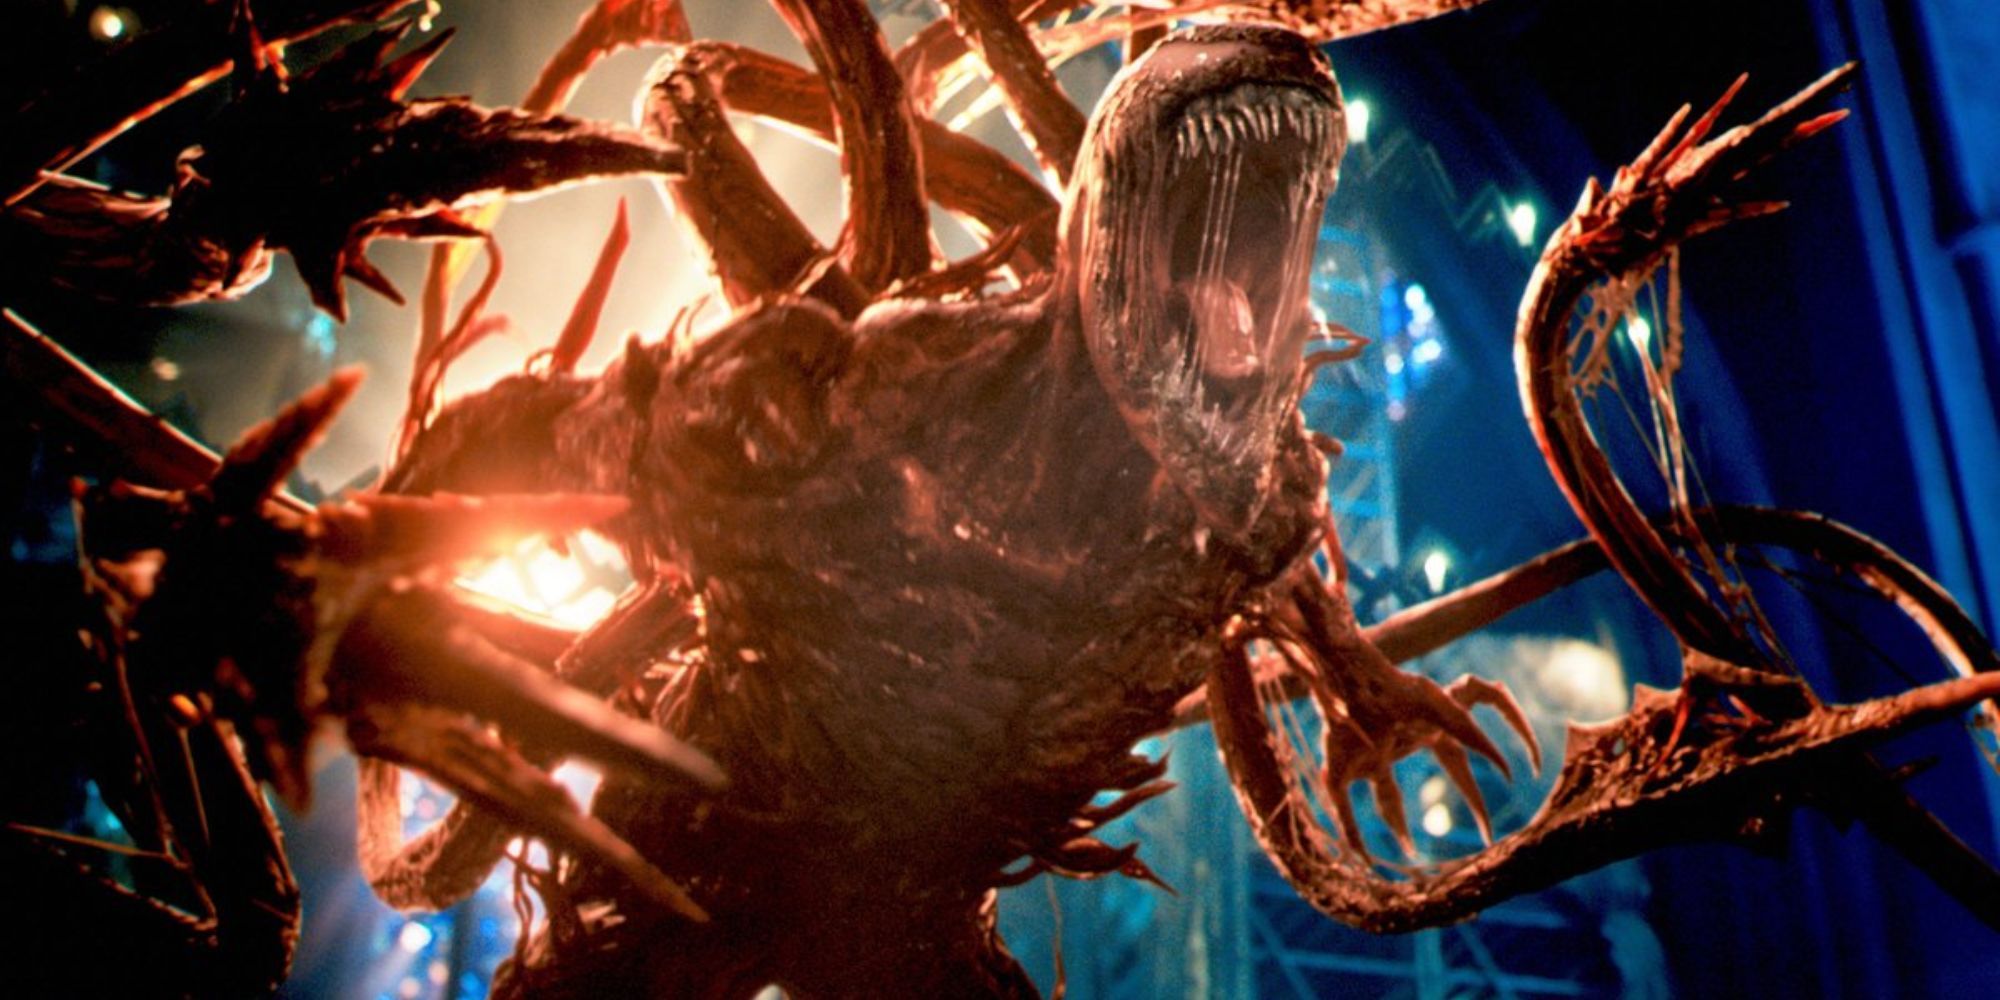 Carnage roaring in rage with tentacles coming out of his back in Venom: Let There Be Carnage